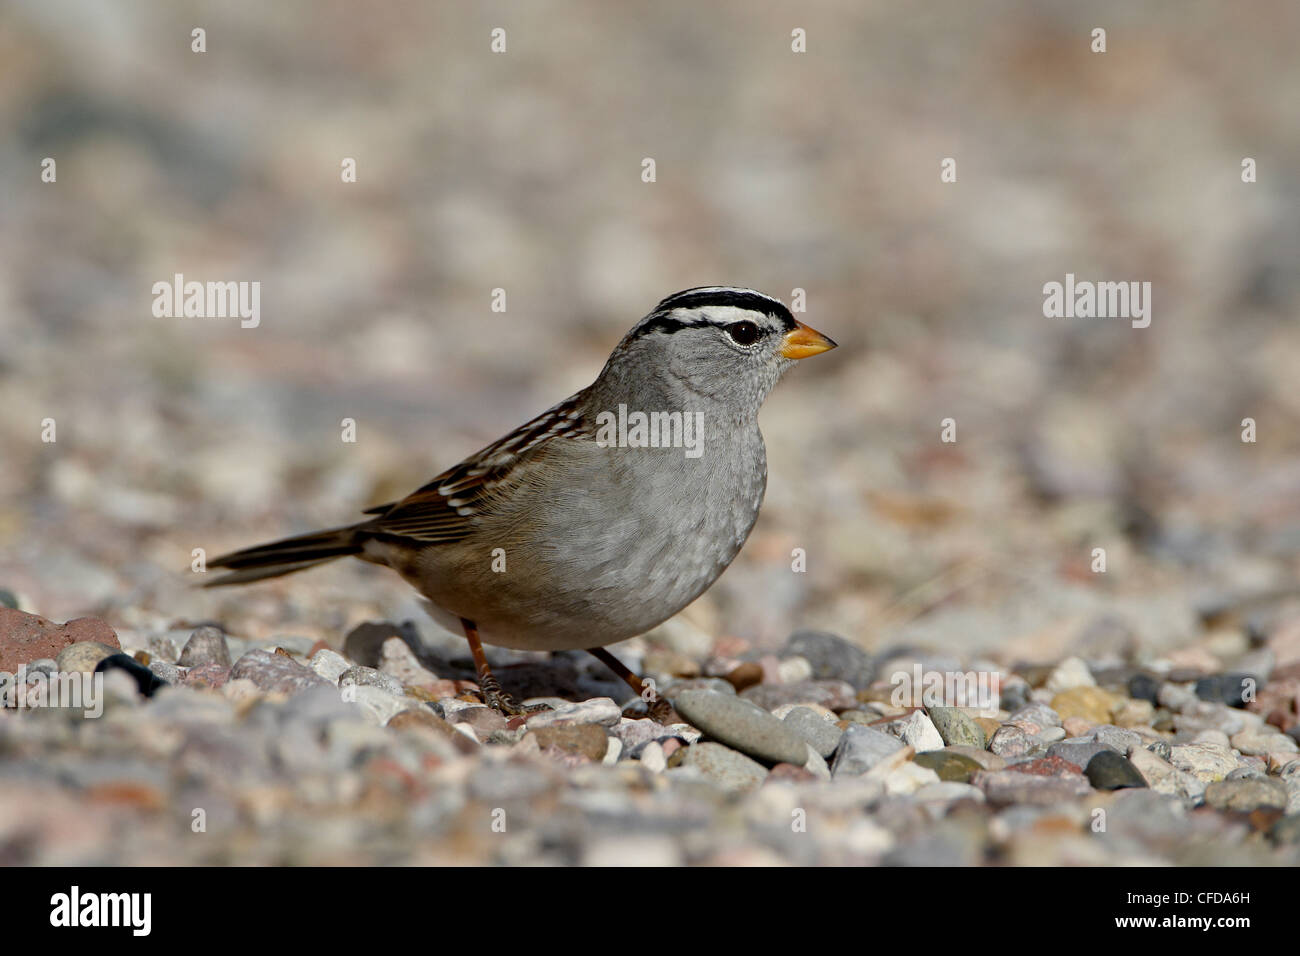 White-crowned sparrow (Zonotrichia leucophrys), Caballo Lake State Park, New Mexico, United States of America, Stock Photo